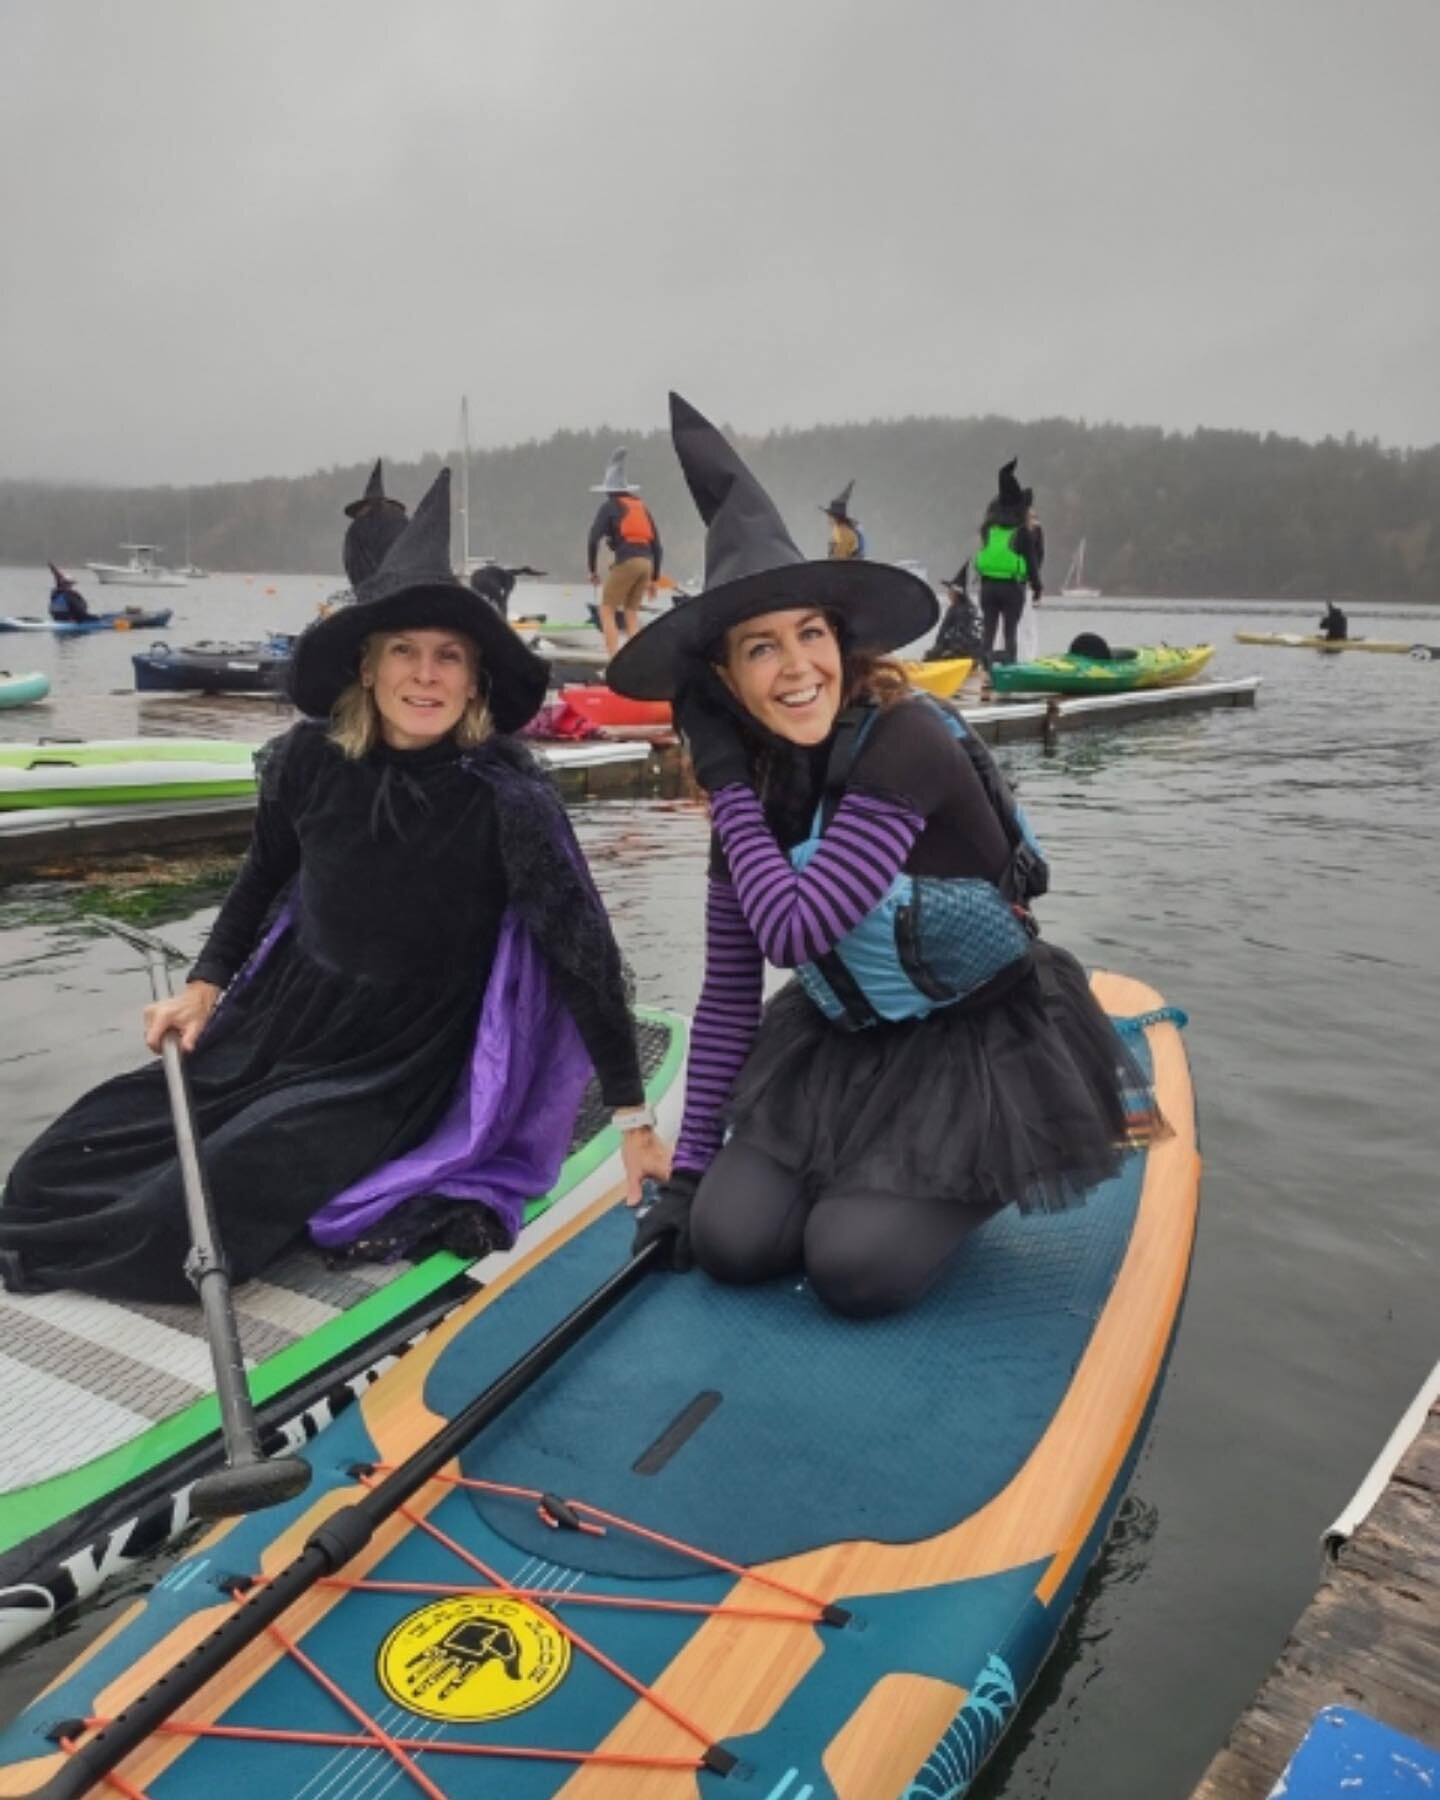 First annual witches paddle! So fun! @ambercowan8 🧙❤️ 
Thank you @trailshop for organizing!